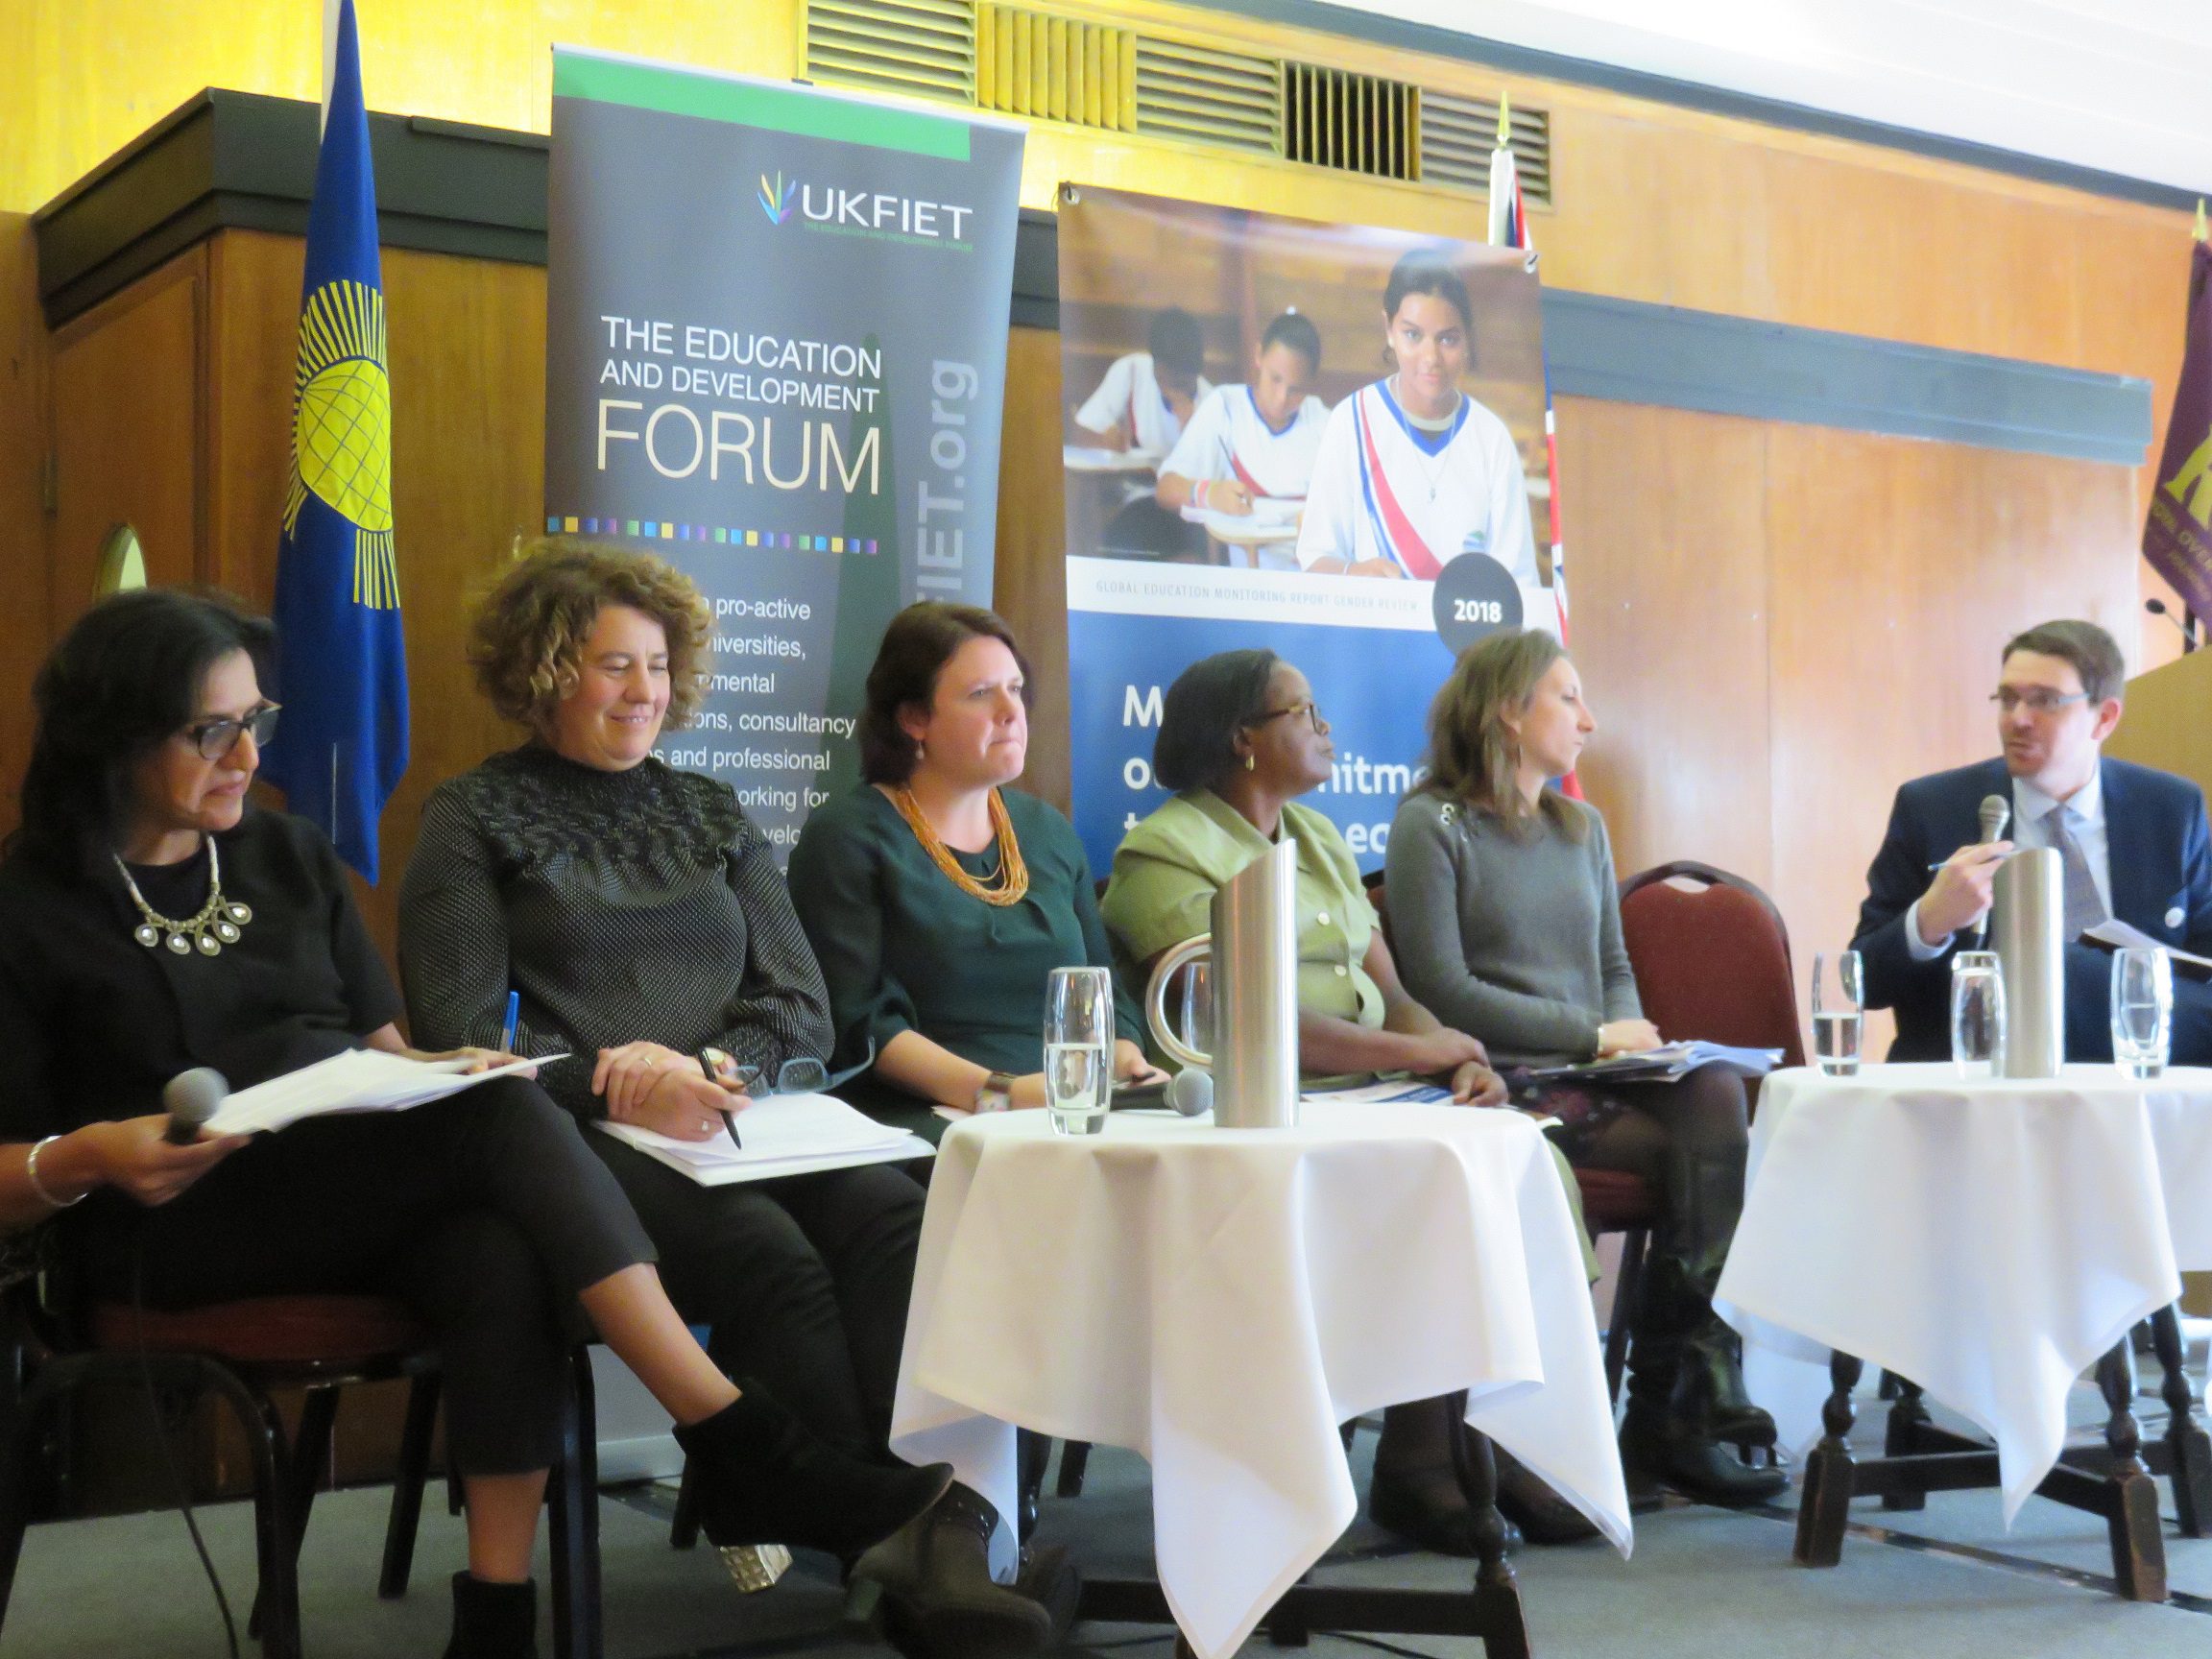 Meeting commitments to gender equality in education